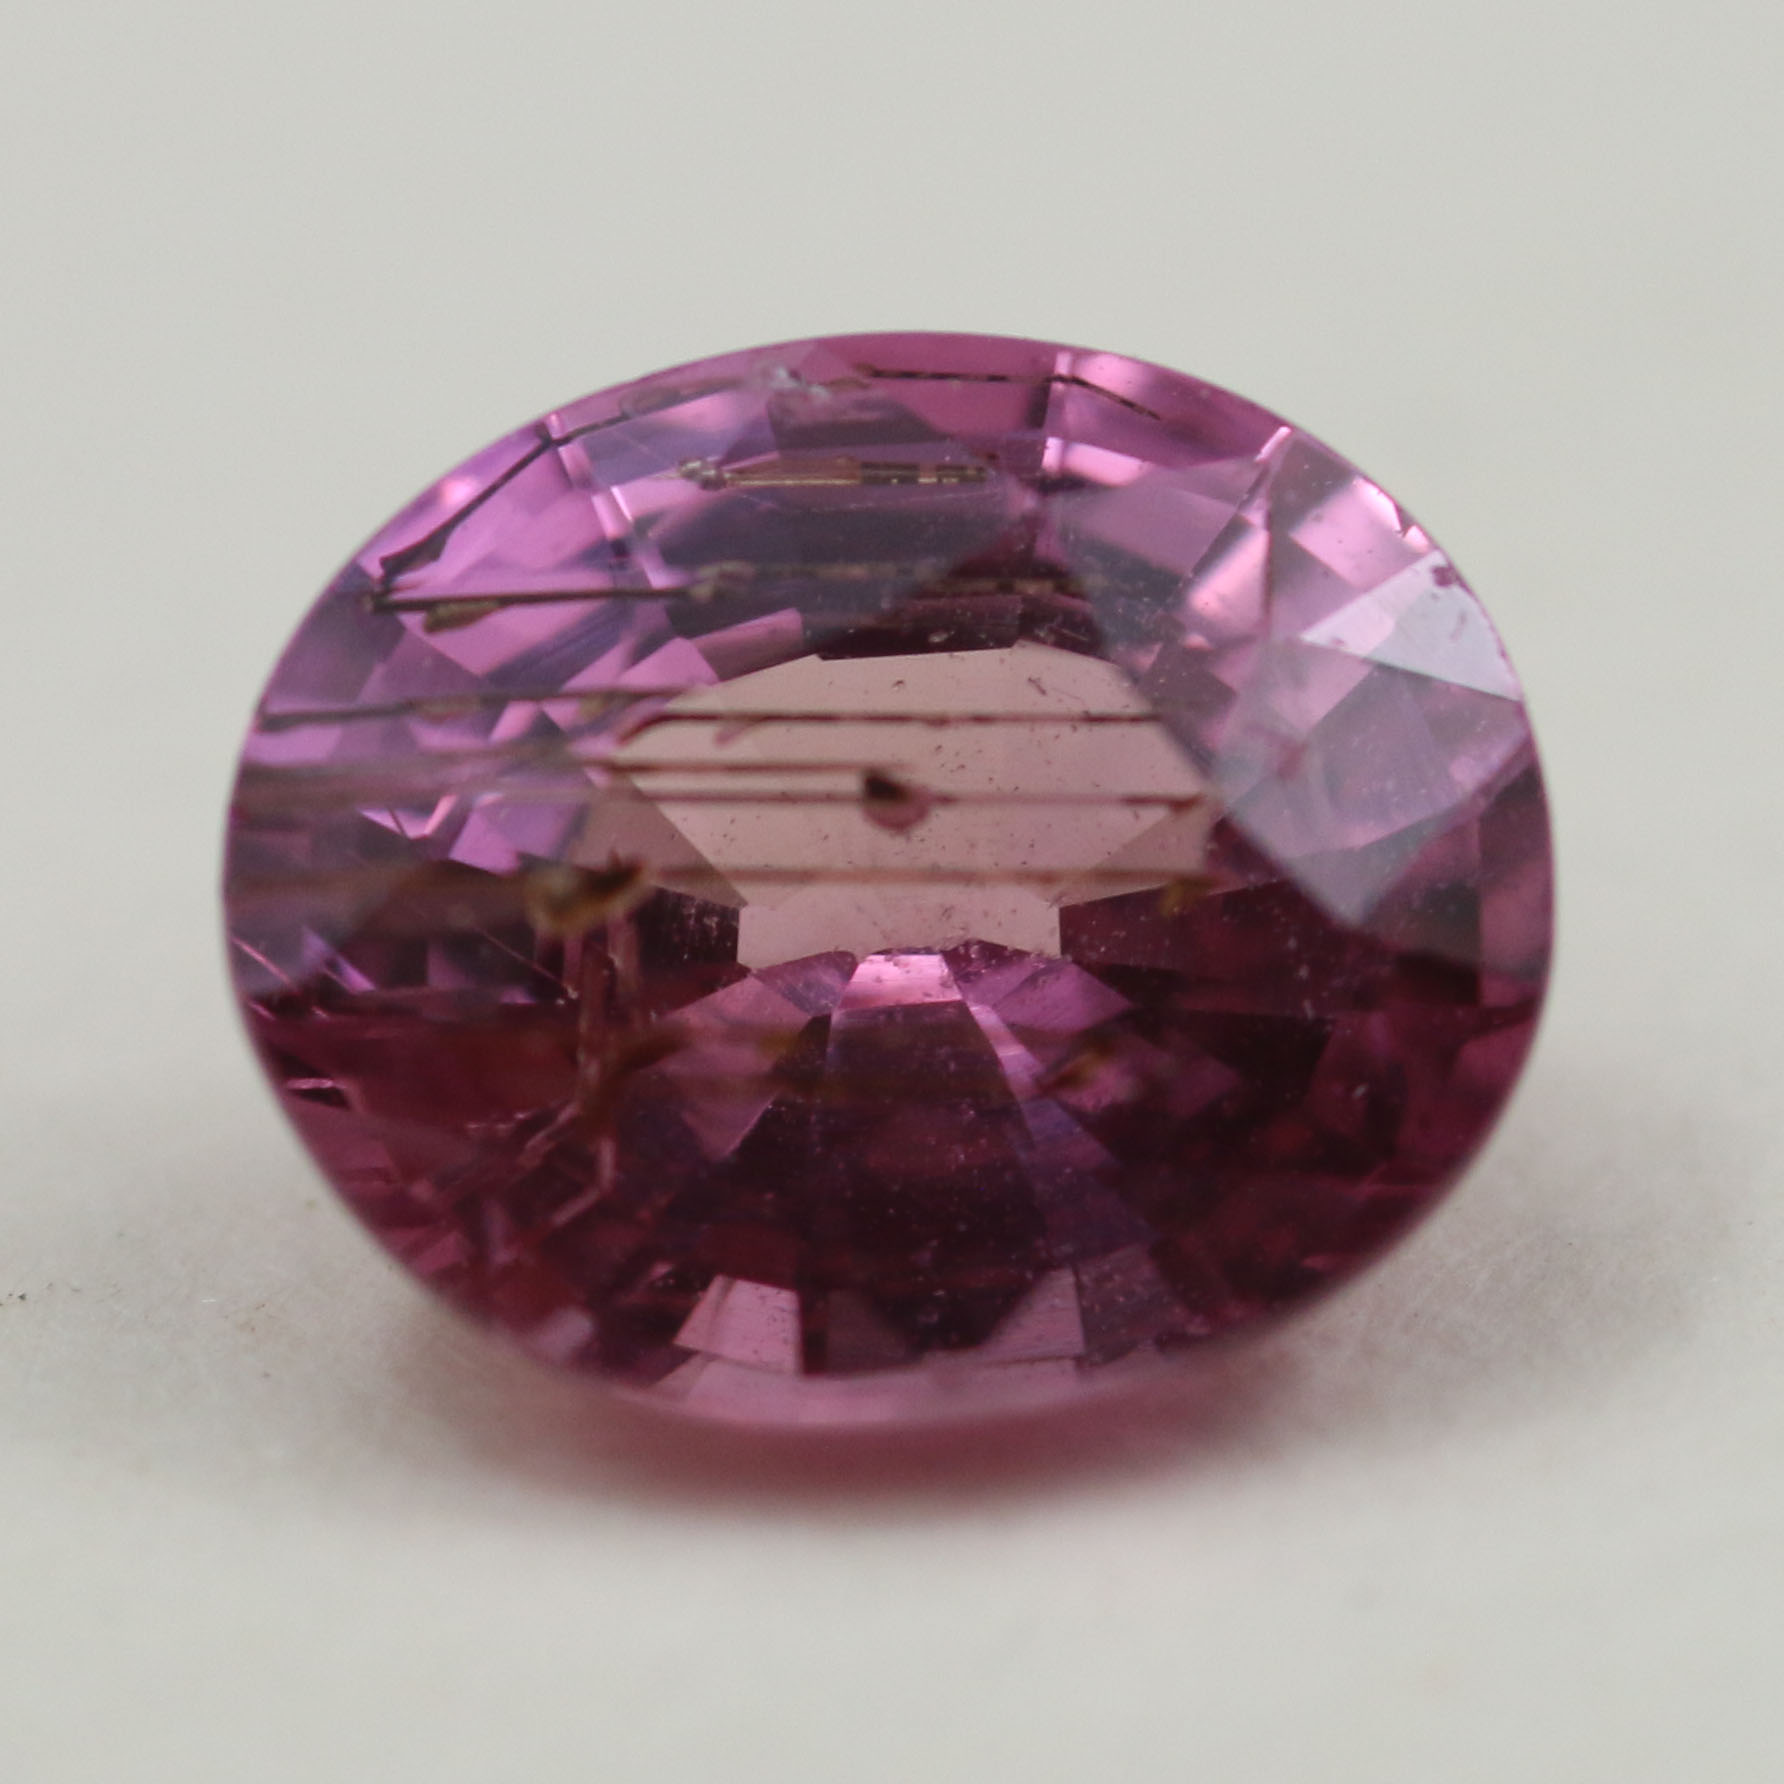 PINK SAPPHIRE WITH RUTILE NEEDLES 7.4X6.1 OVAL